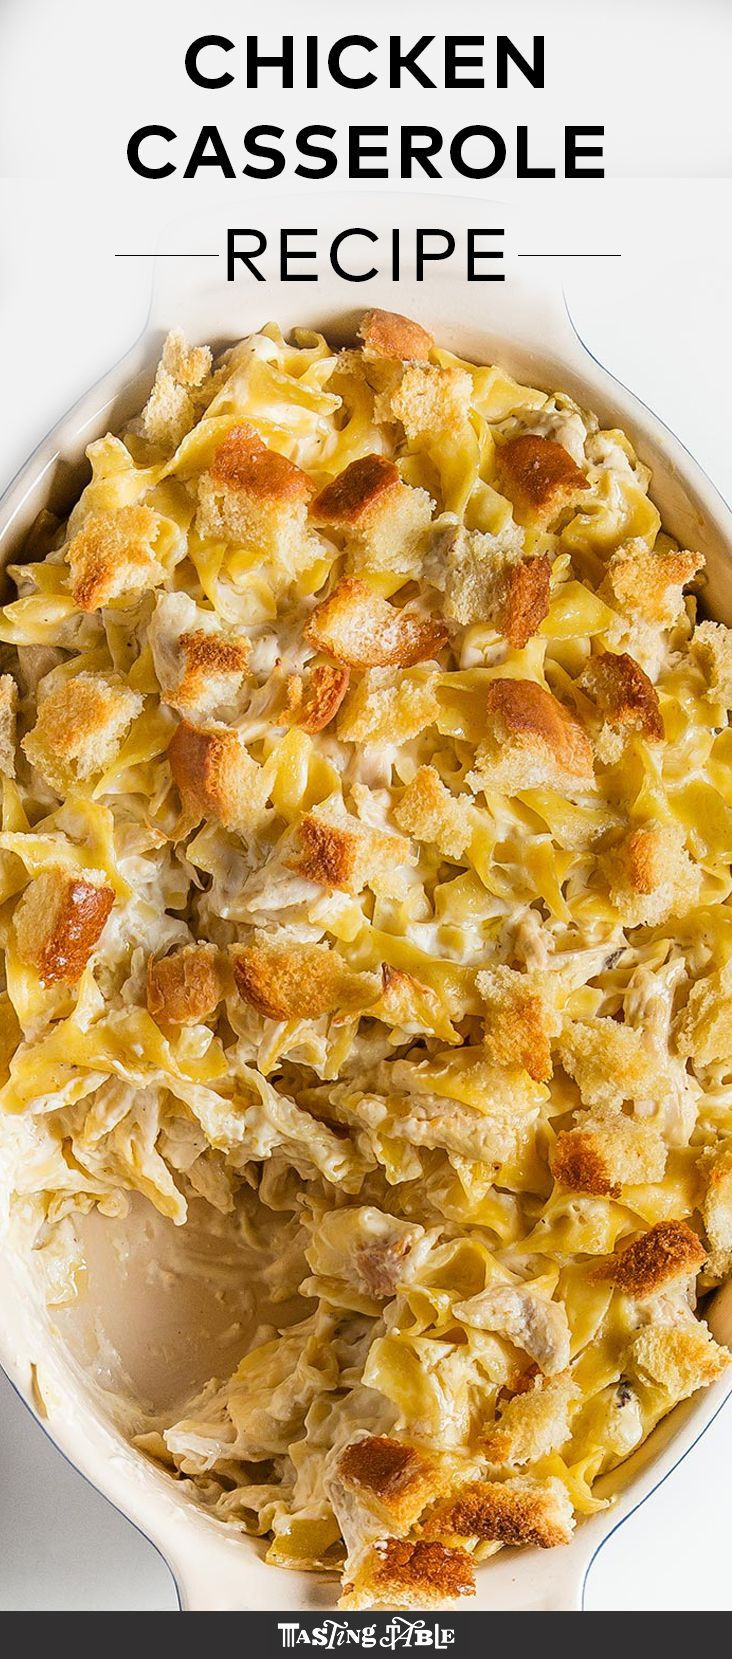 Don’t Miss Our 15 Most Shared Chicken Casserole with Cream Of Chicken soup